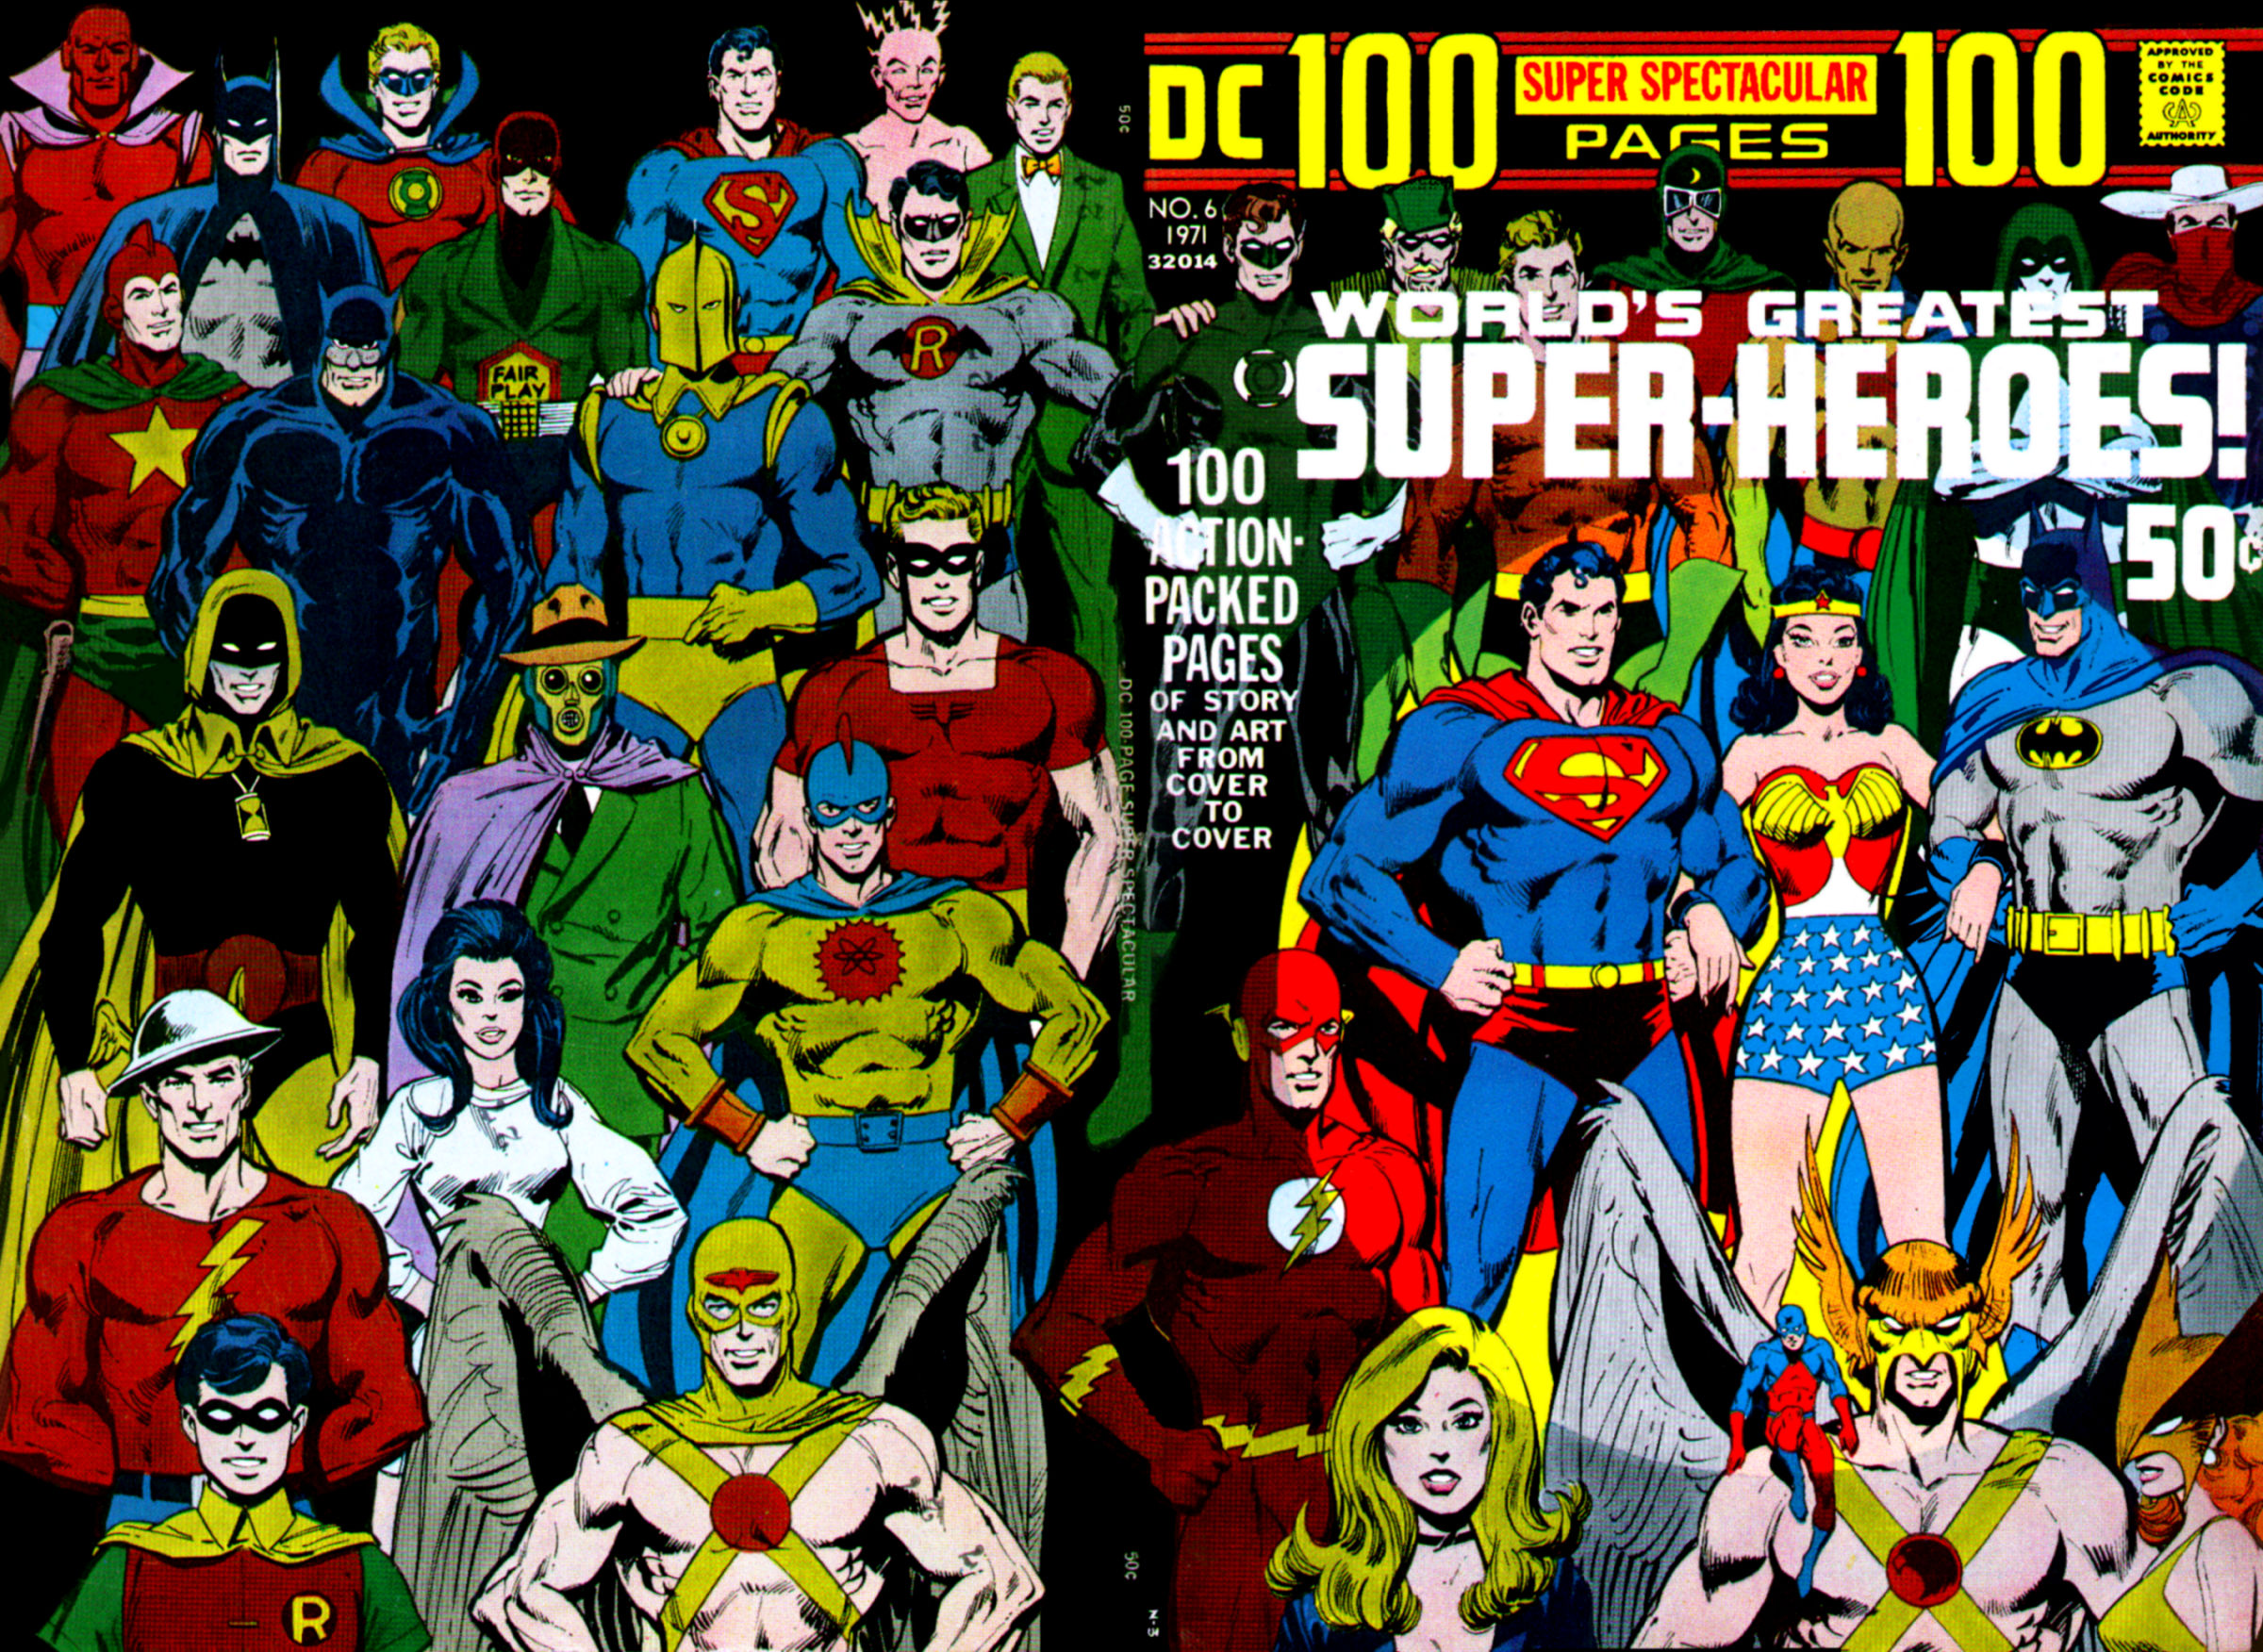 Dc 100 Page Super Spectaculars The World S Greatest Super Heroes